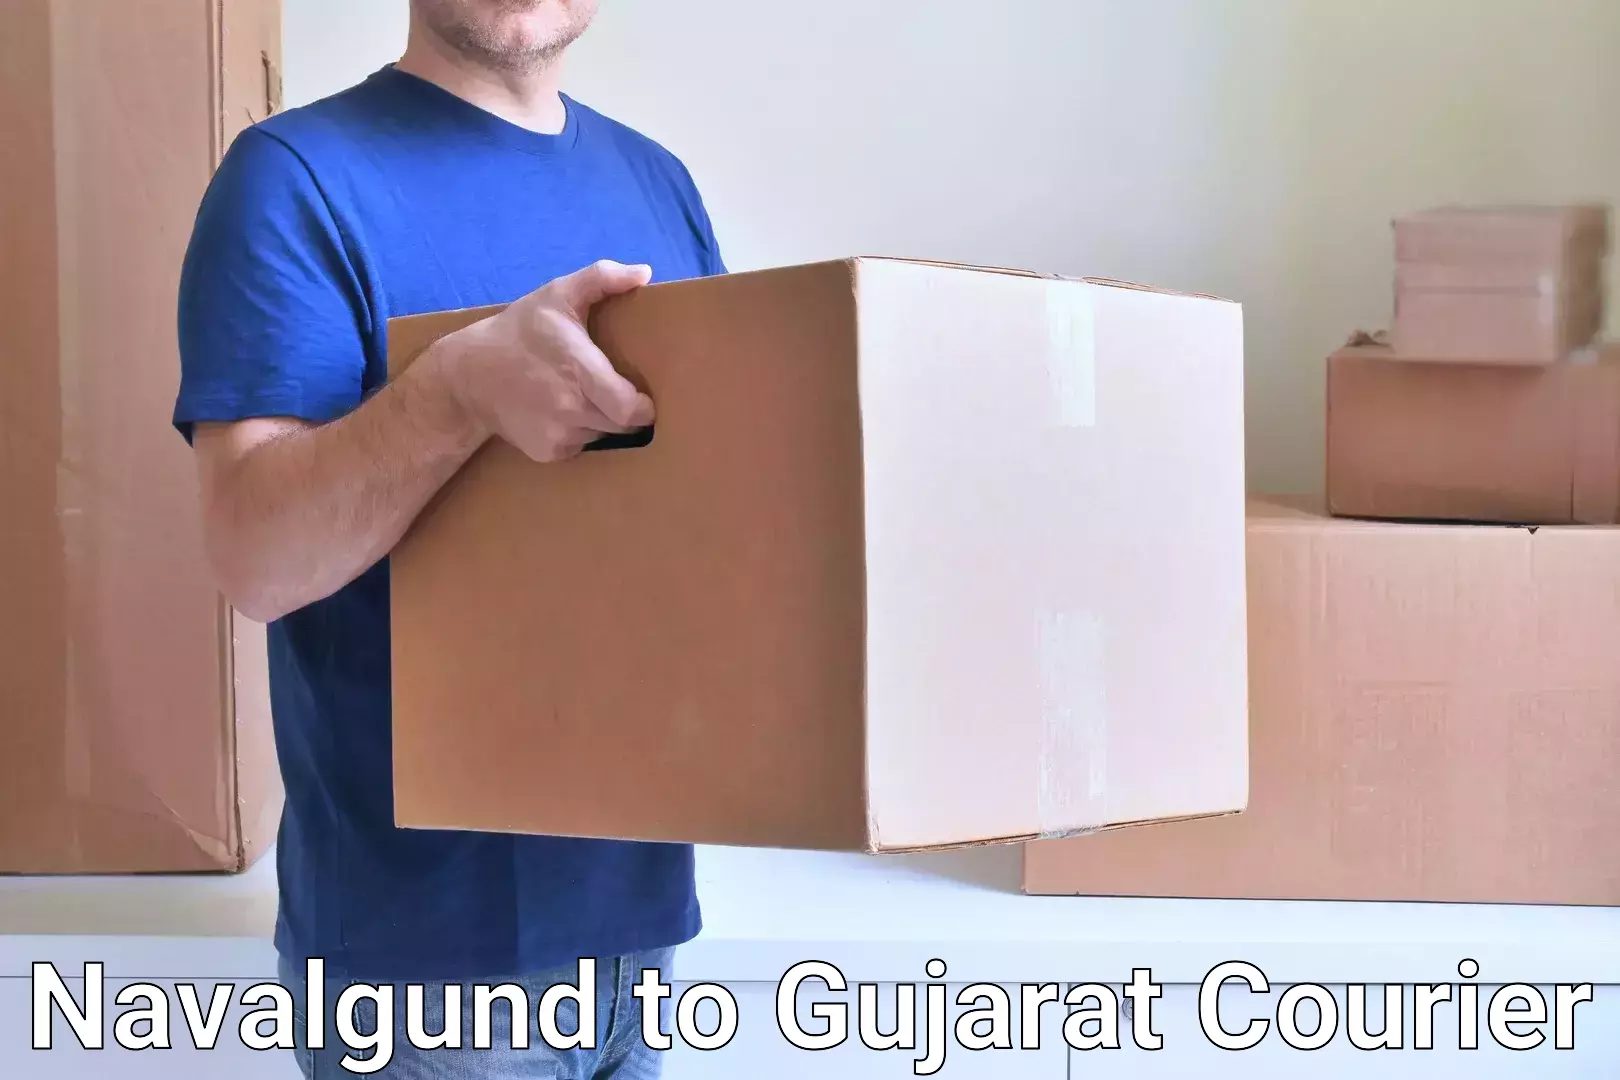 Automated parcel services Navalgund to GIDC